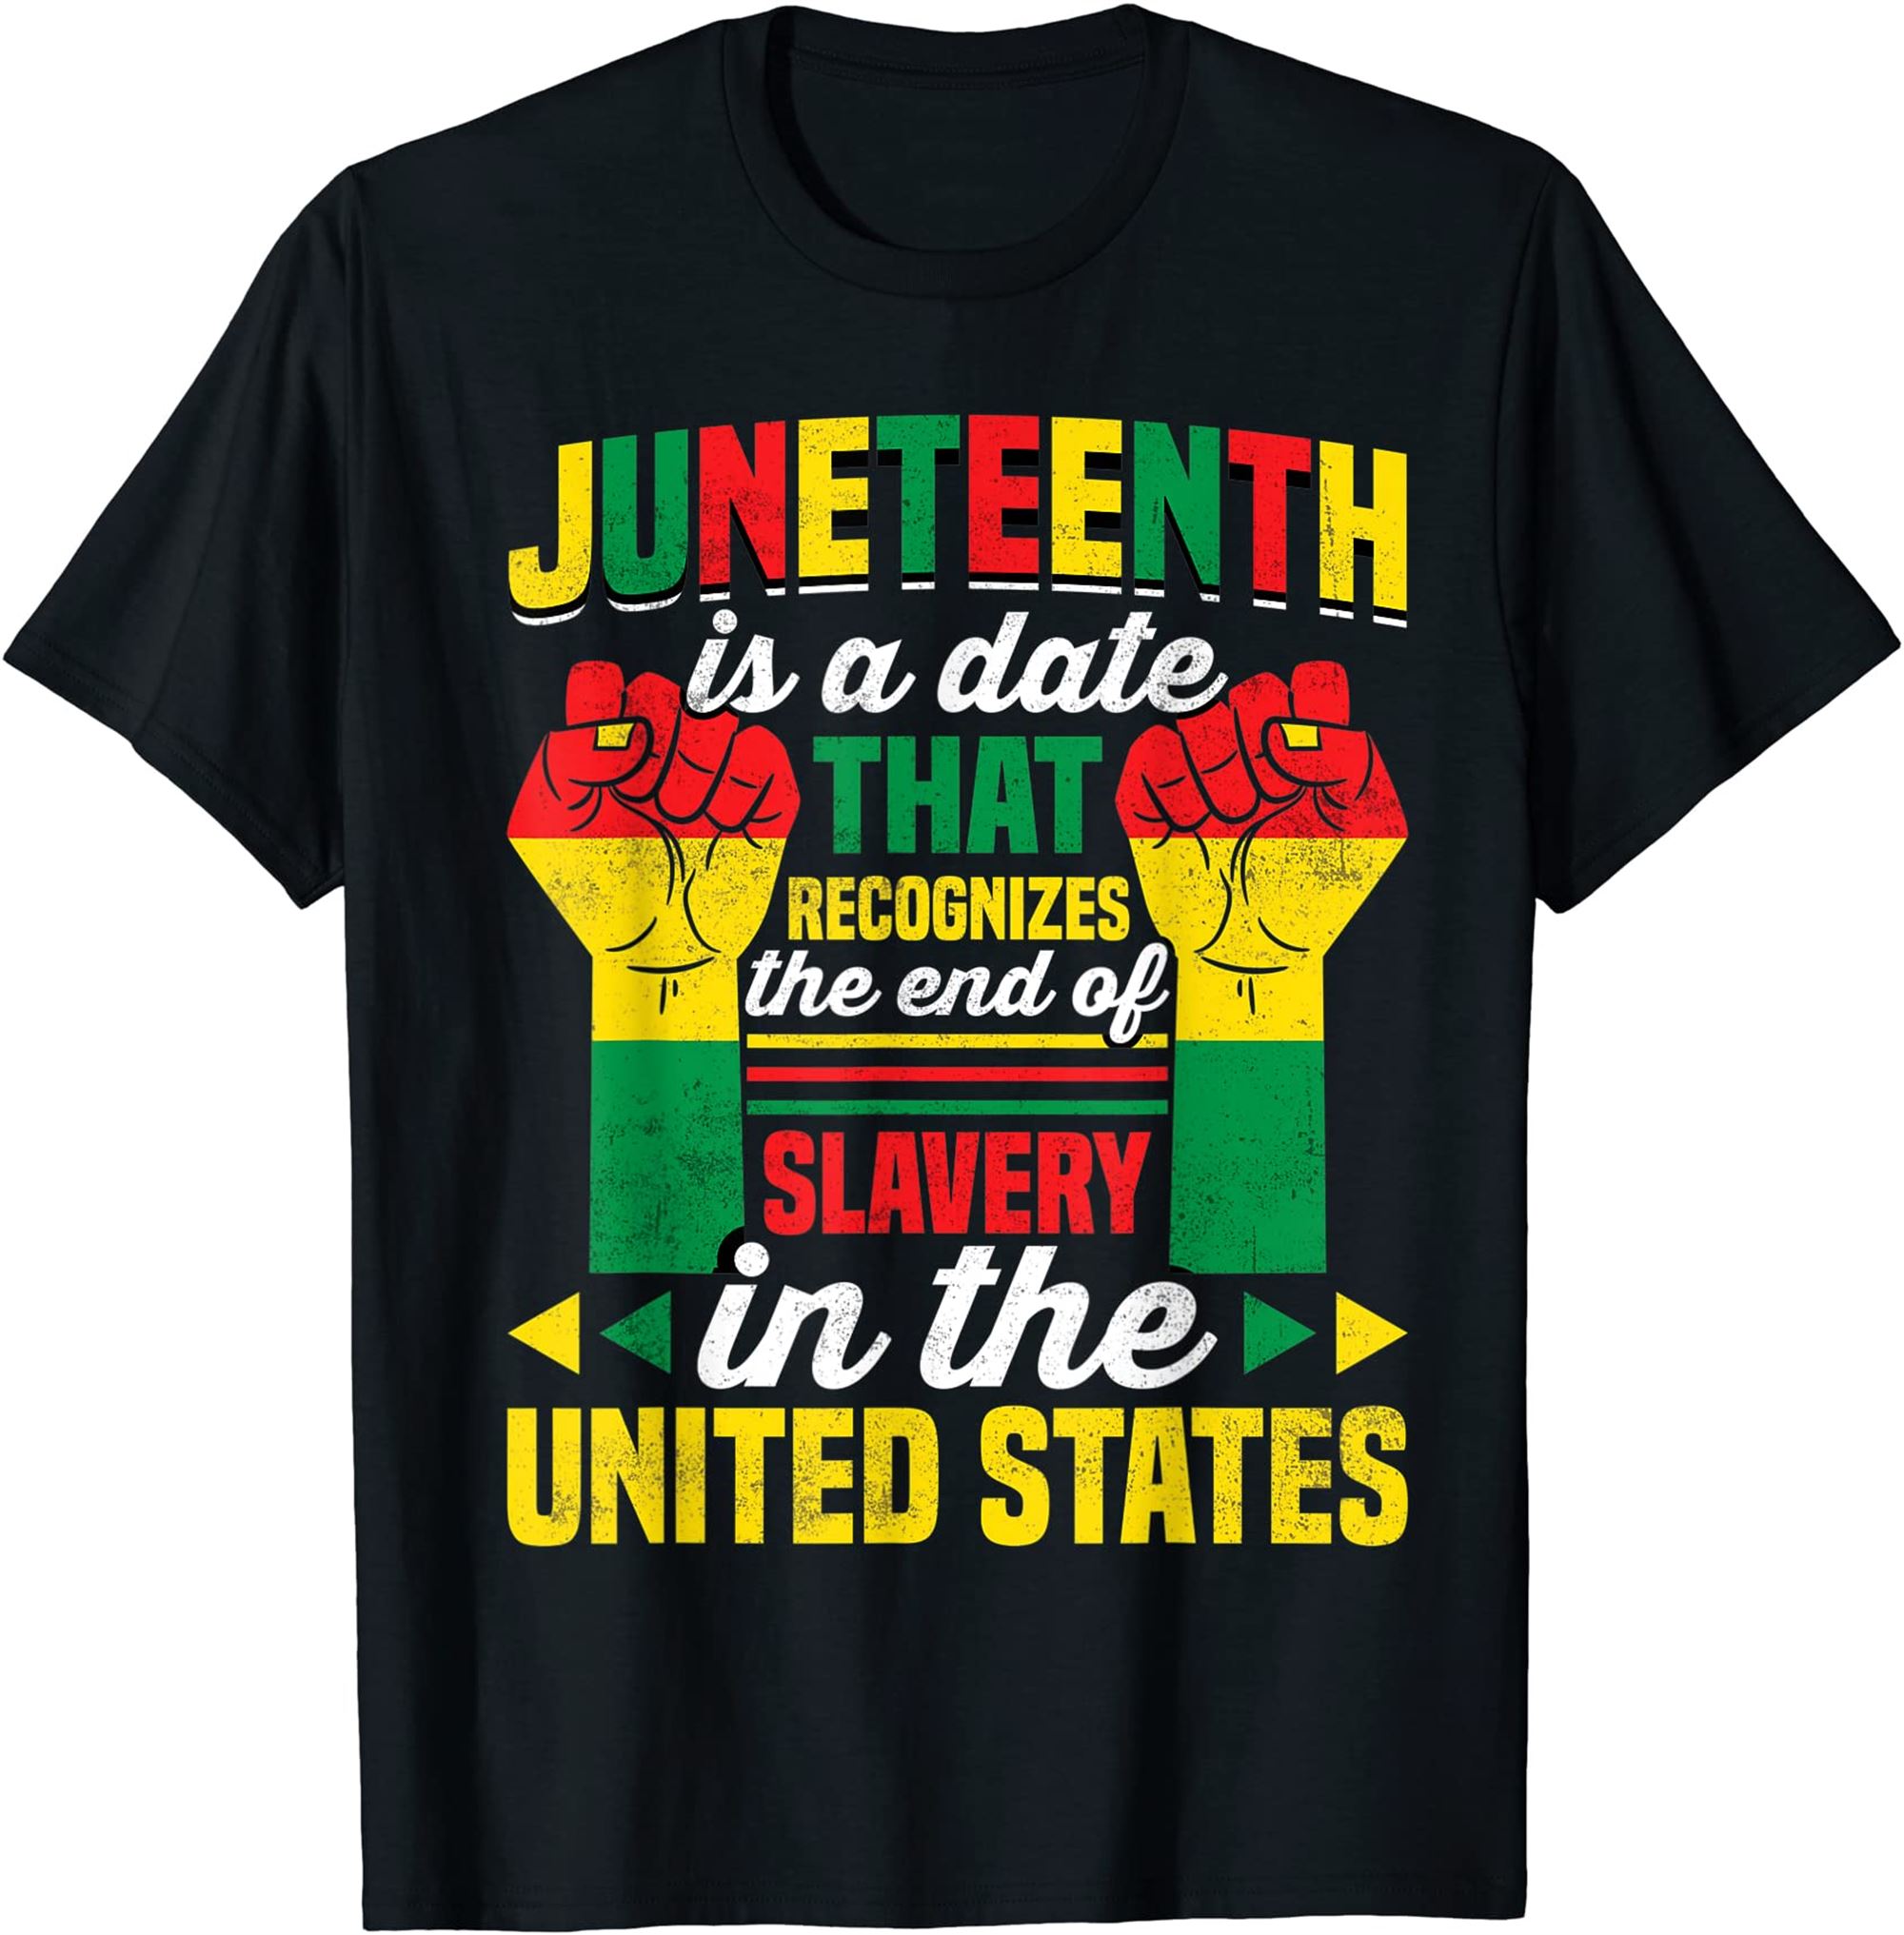 What Is Juneteenth T-shirt Full Size Up To 5xl